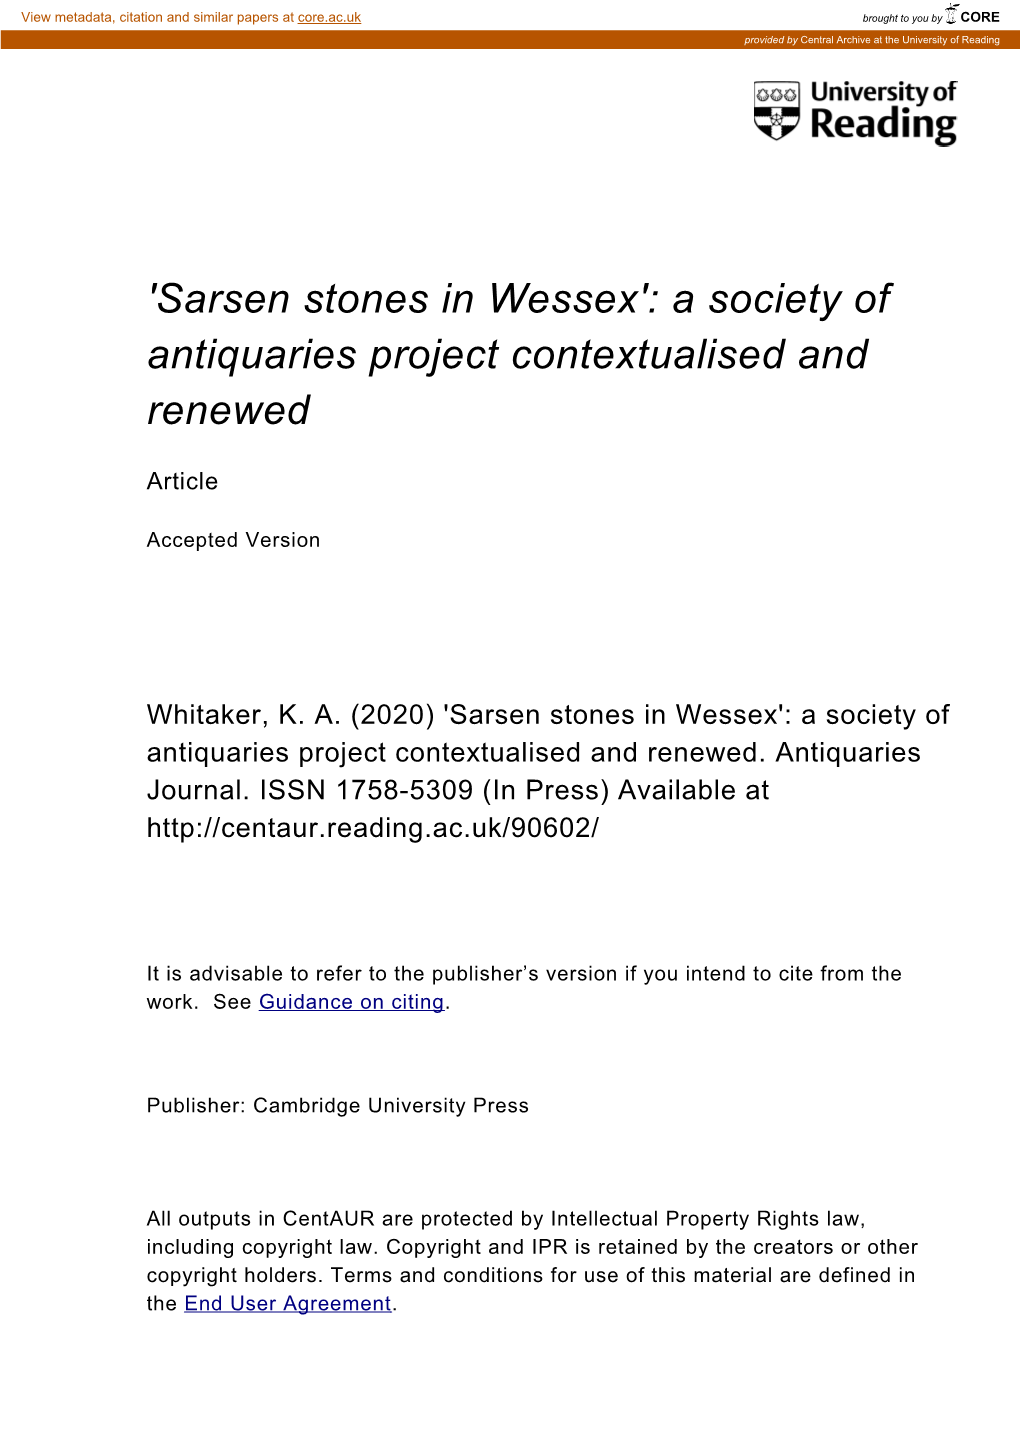 Sarsen Stones in Wessex': a Society of Antiquaries Project Contextualised and Renewed